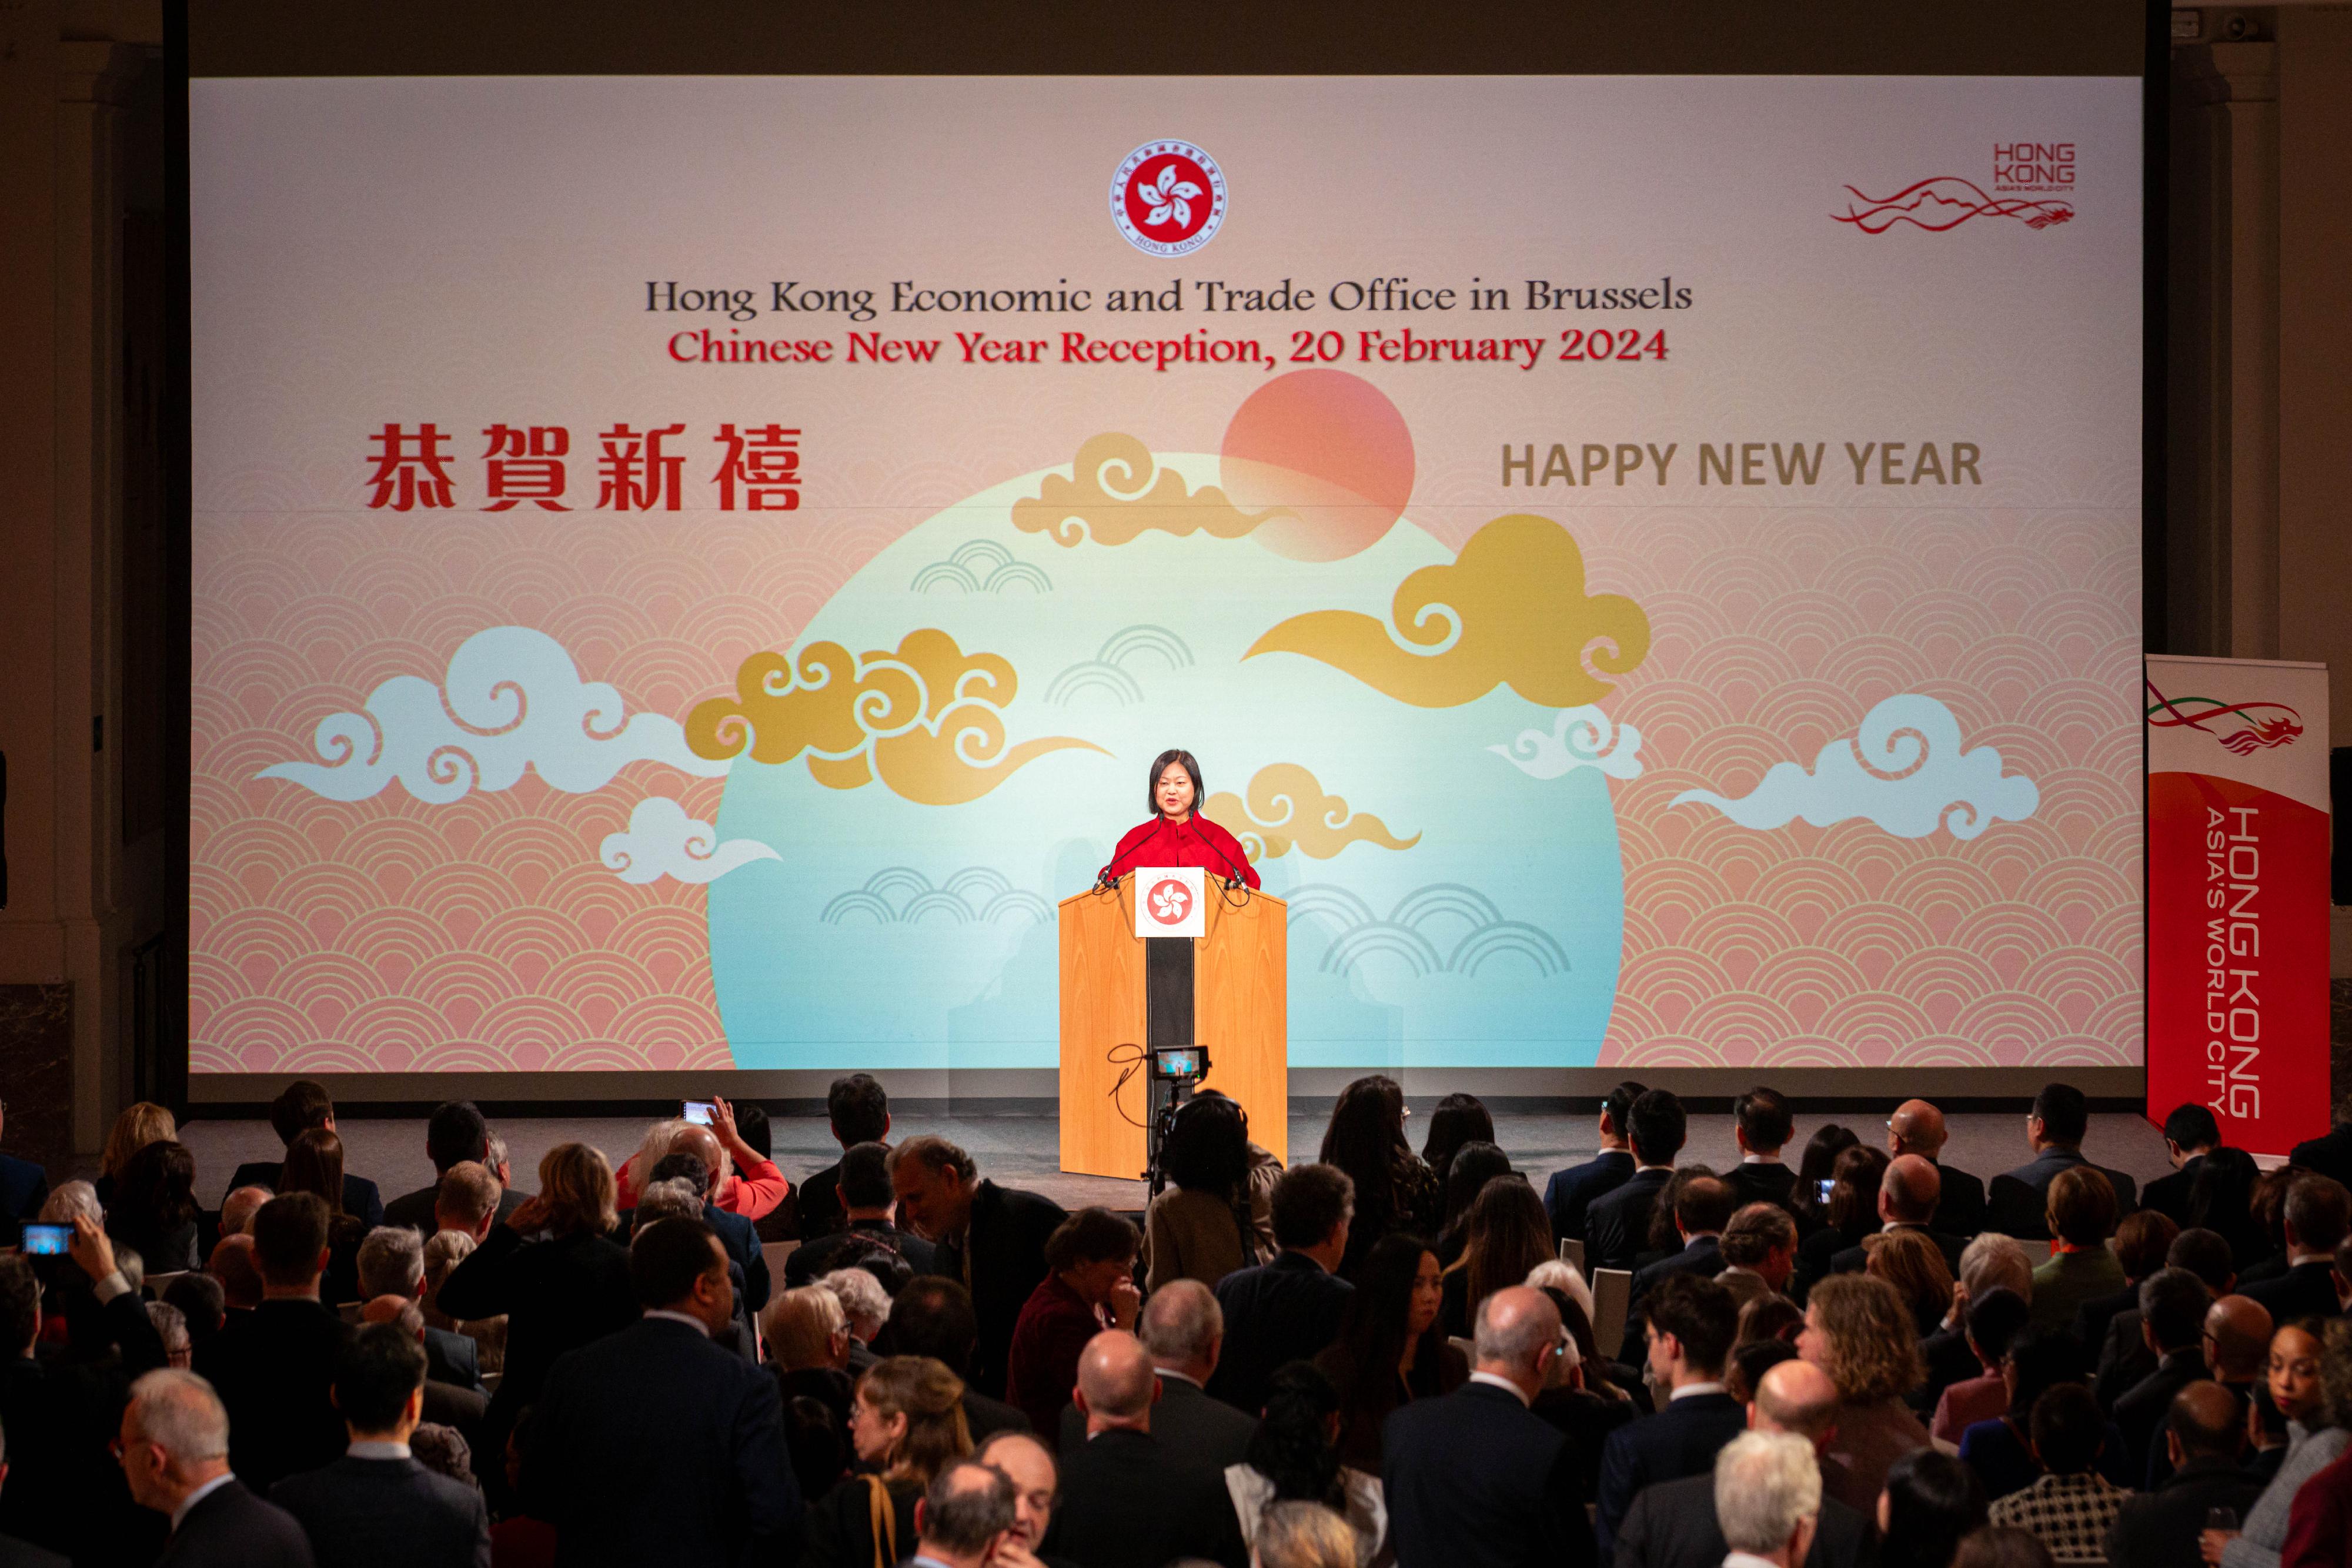 Special Representative for Hong Kong Economic and Trade Affairs to the European Union, Ms Shirley Yung, delivered welcoming remarks at the Chinese New Year reception held in Brussels, Belgium on February 20 (Brussels time).